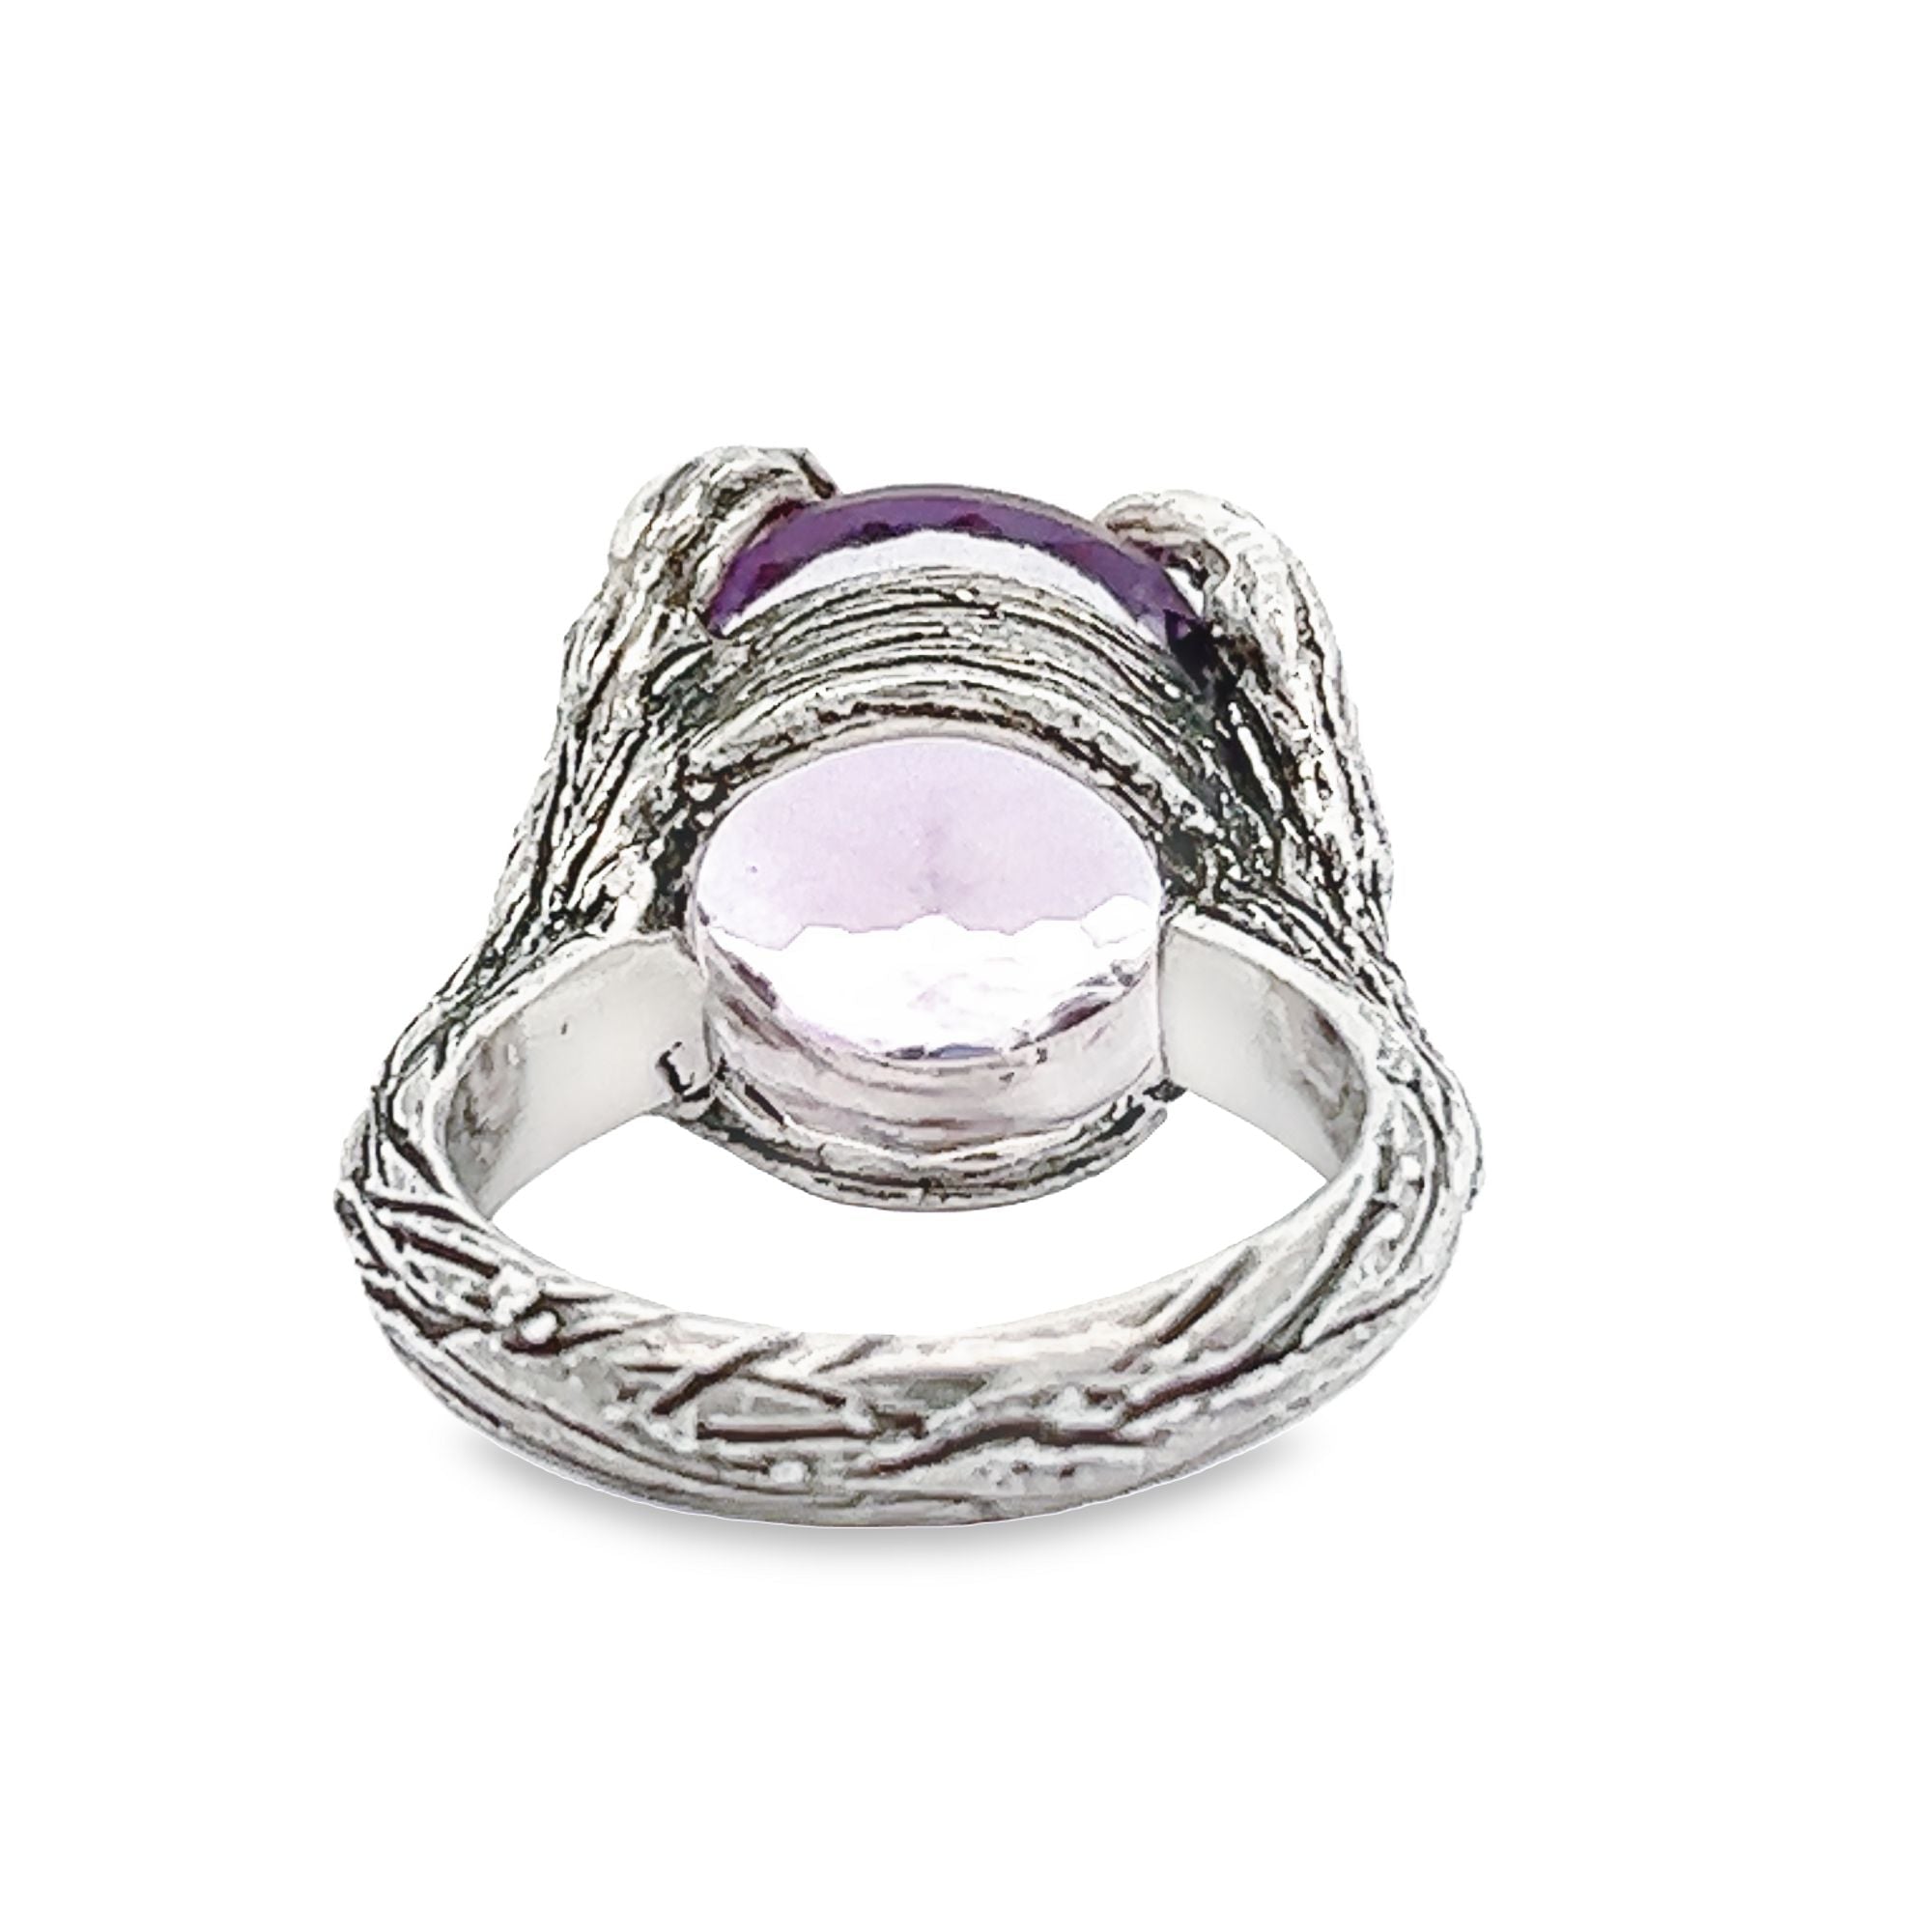 Back View of Amethyst Sterling Silver Cocktail Ring